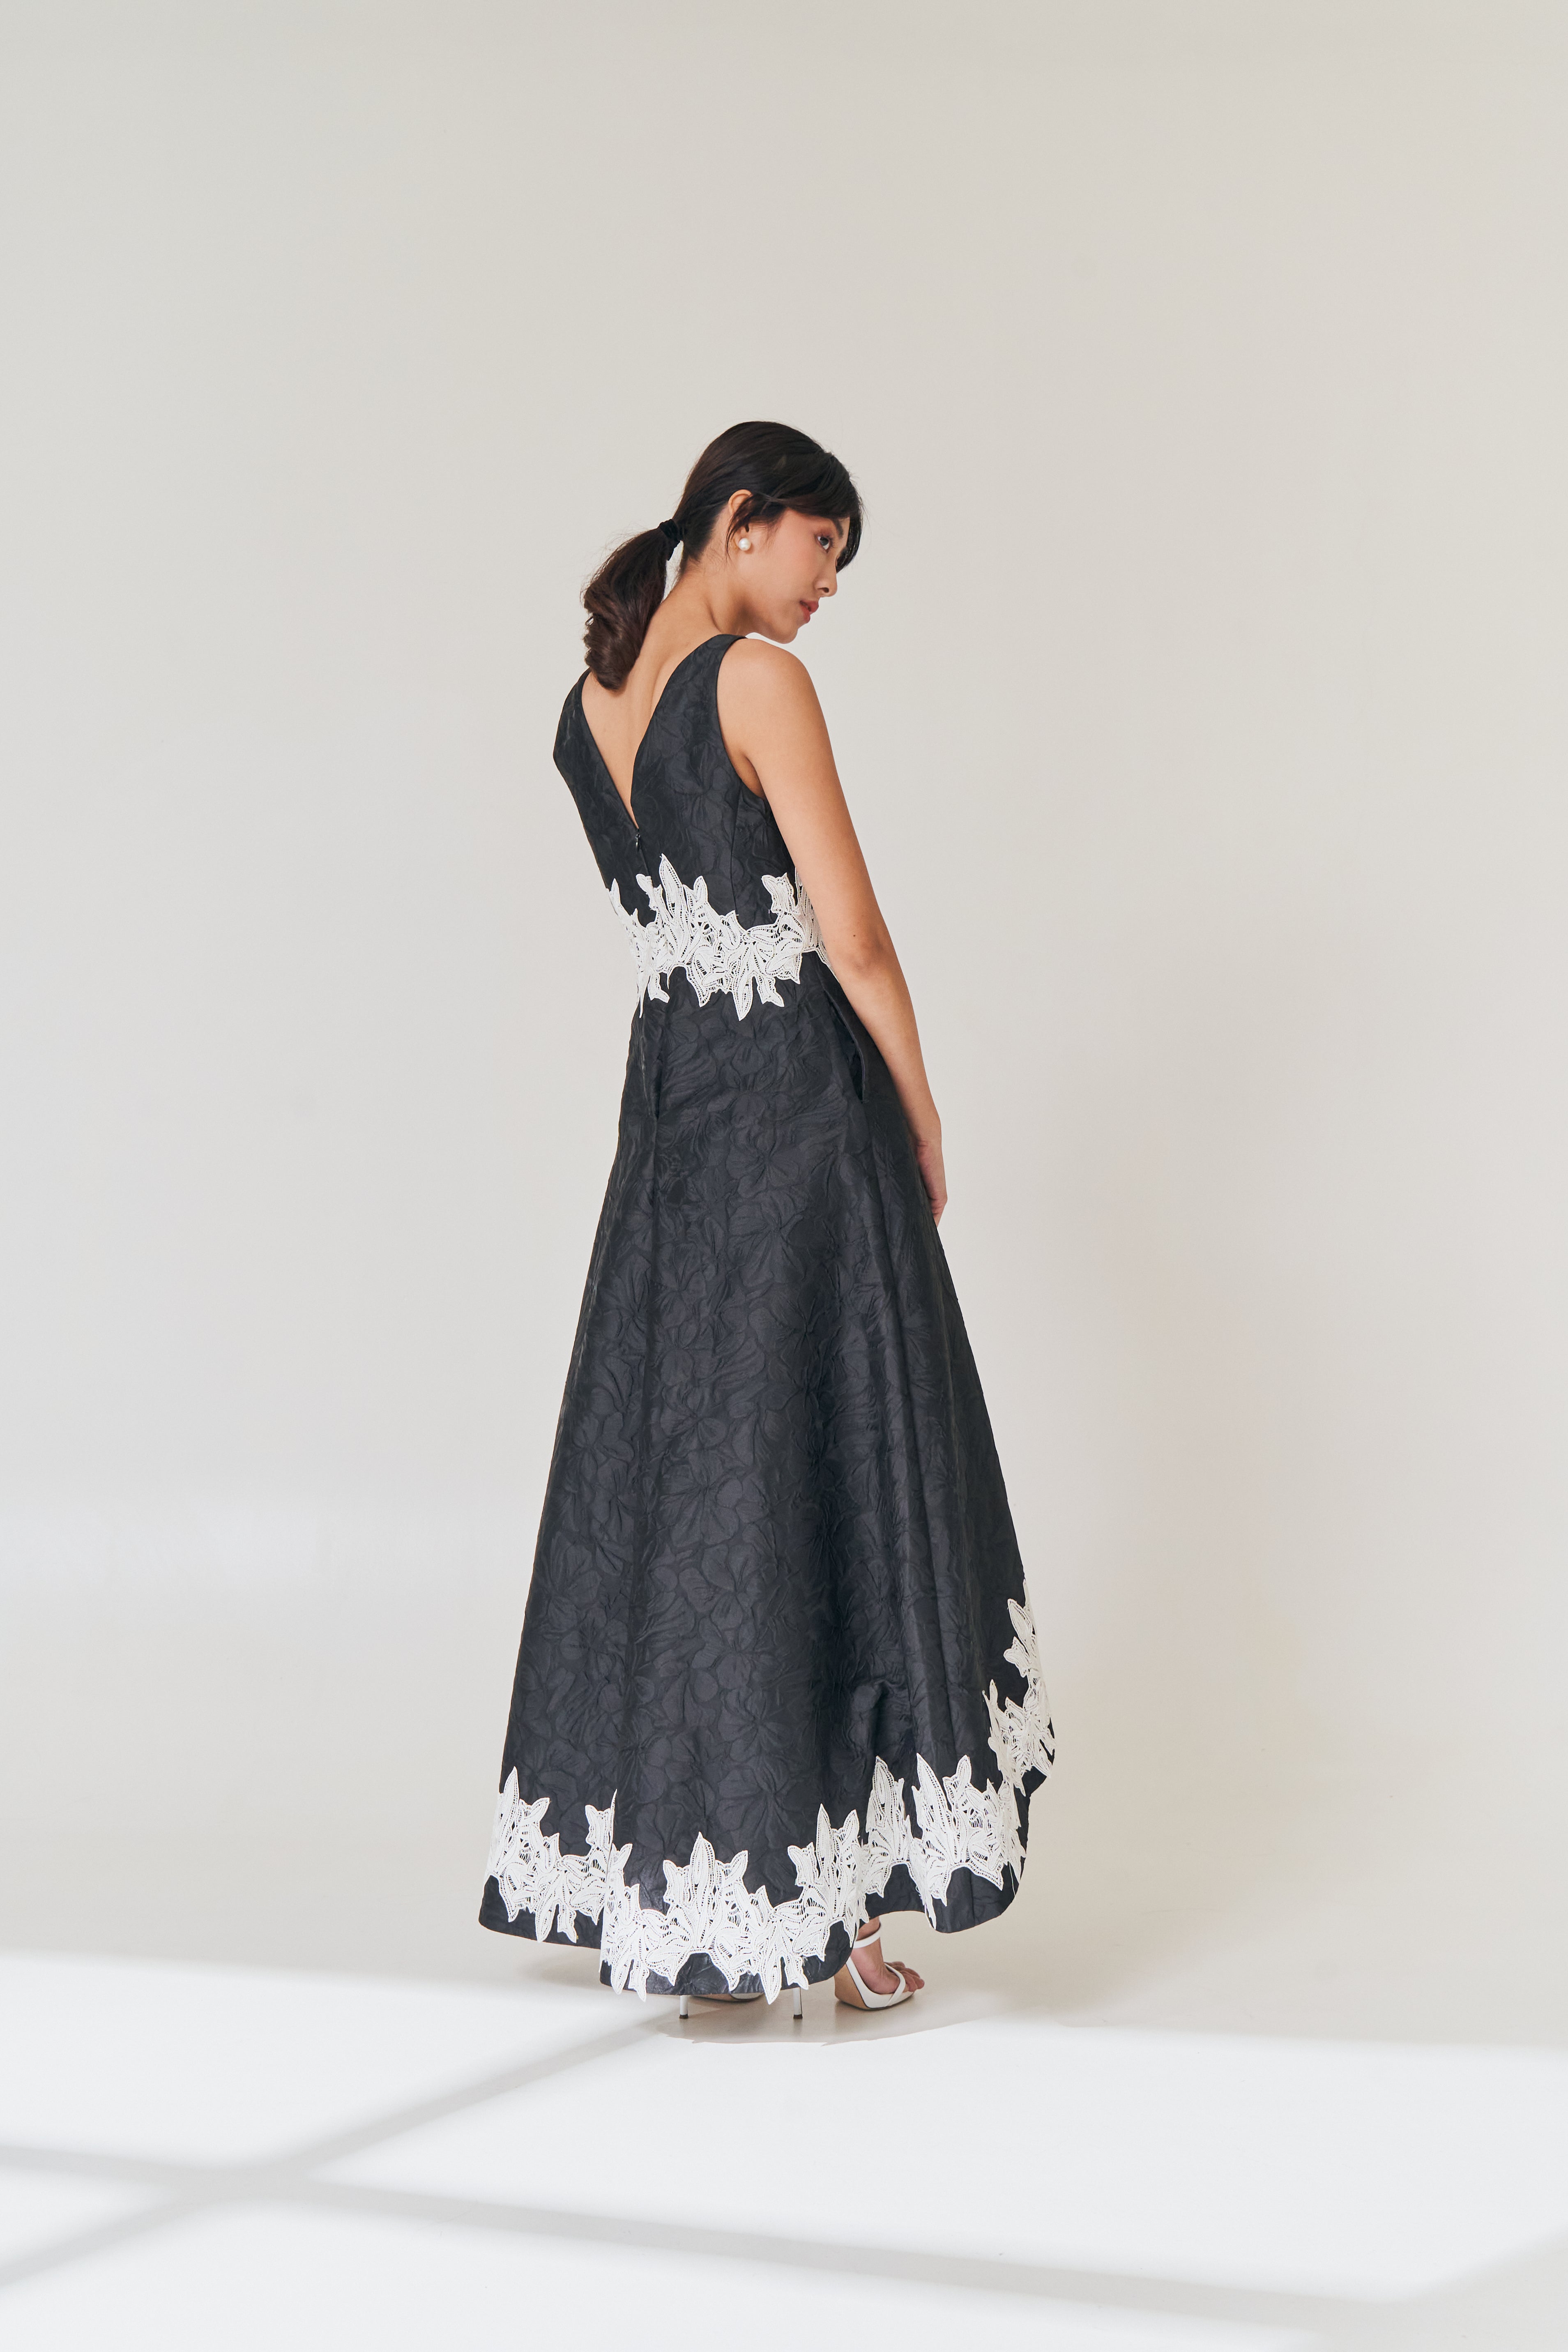 Black Brocade Gown with White Applique